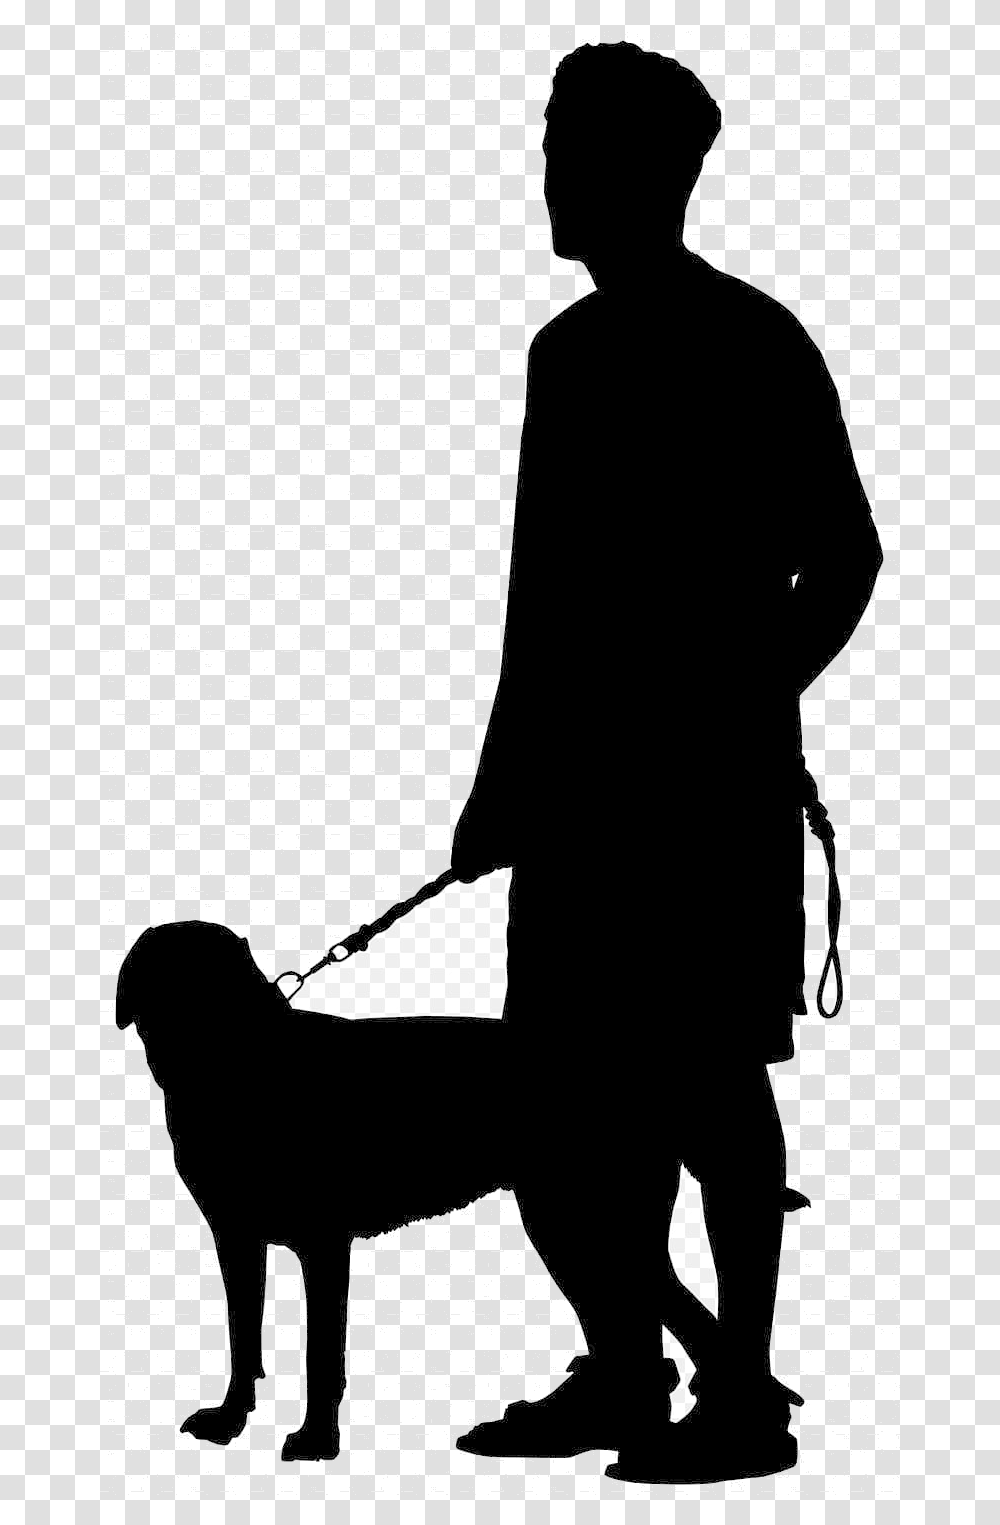 Dog Walking Silhouette Man With Background Background Dog Silhouette, Person, Beverage, Alcohol, Sitting Transparent Png